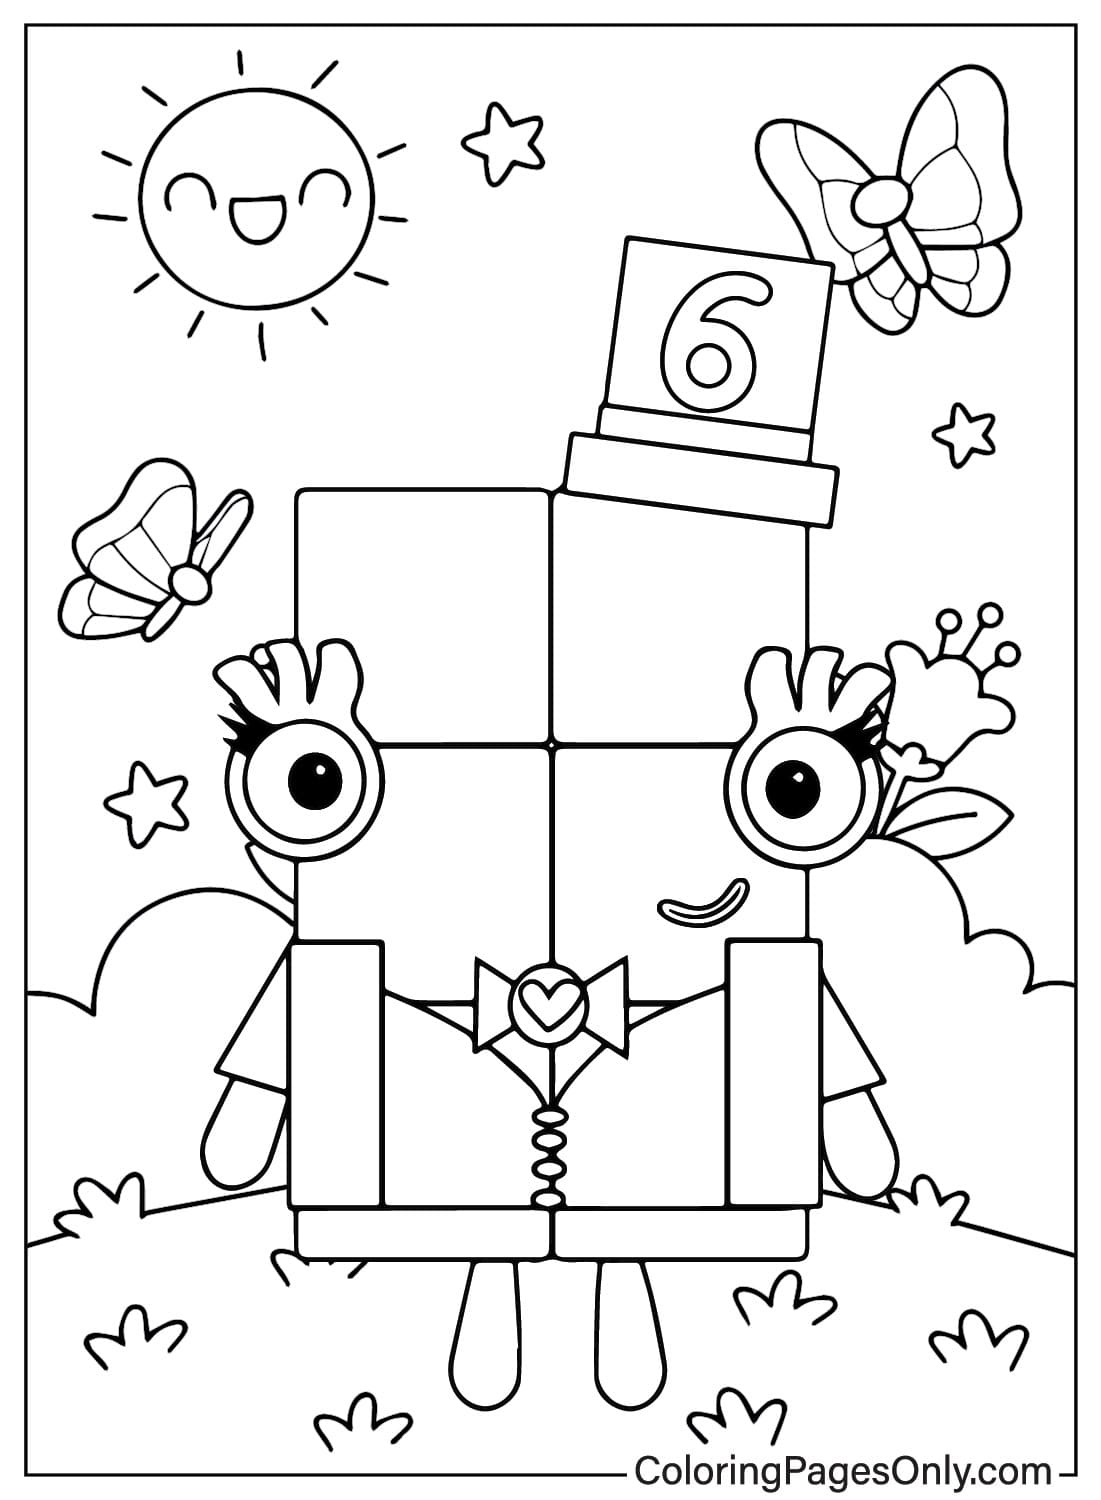 Numberblocks Six Coloring Page Free Printable Coloring Page